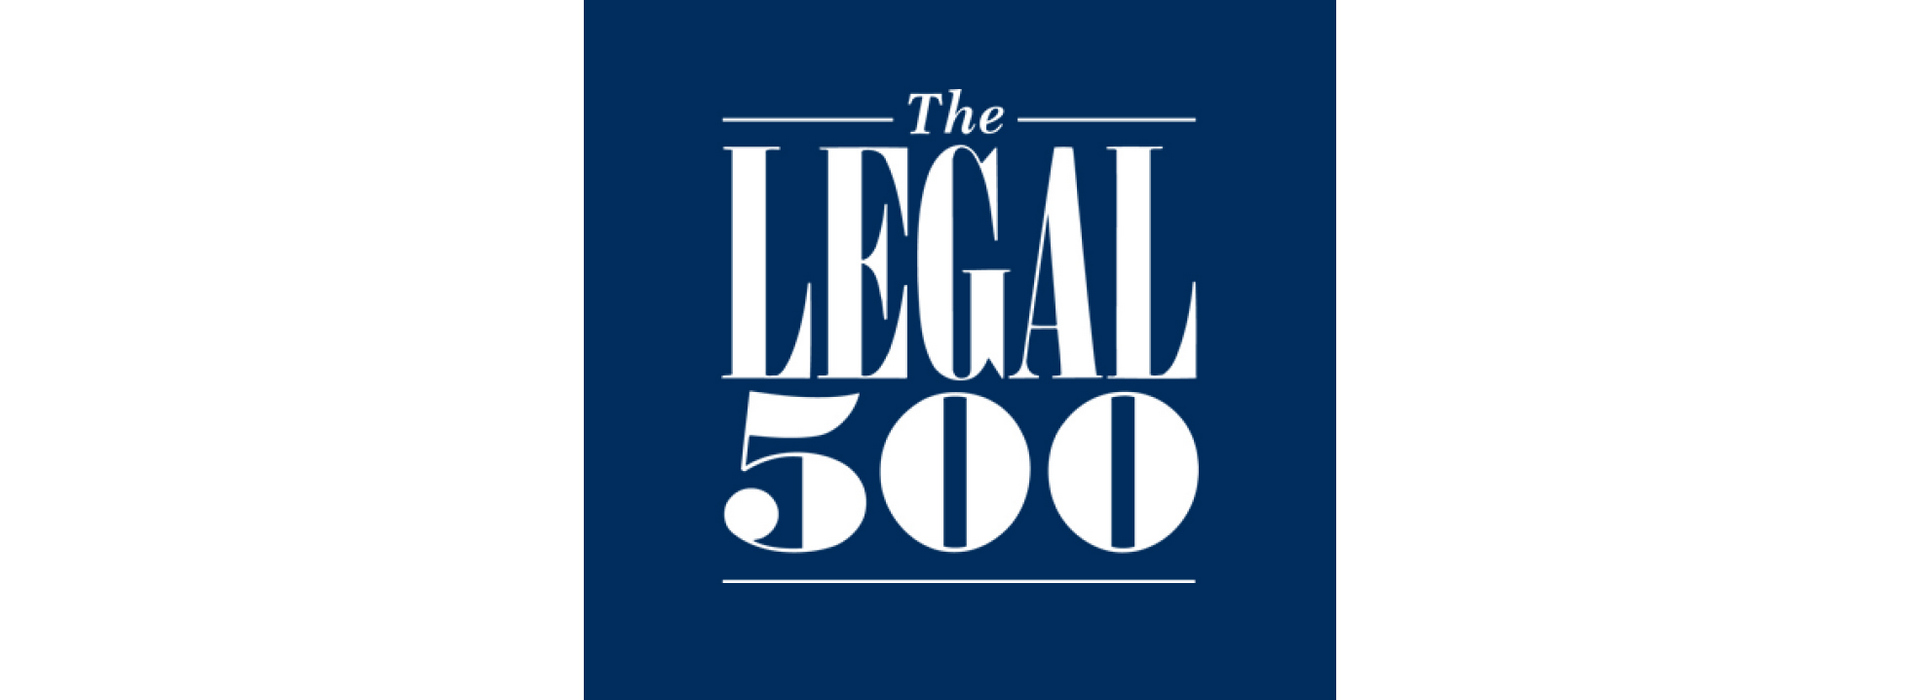 GOLAW Several Years in a Row Wins Top Positions in Prestigious International Ranking Legal 500 Emea 2022